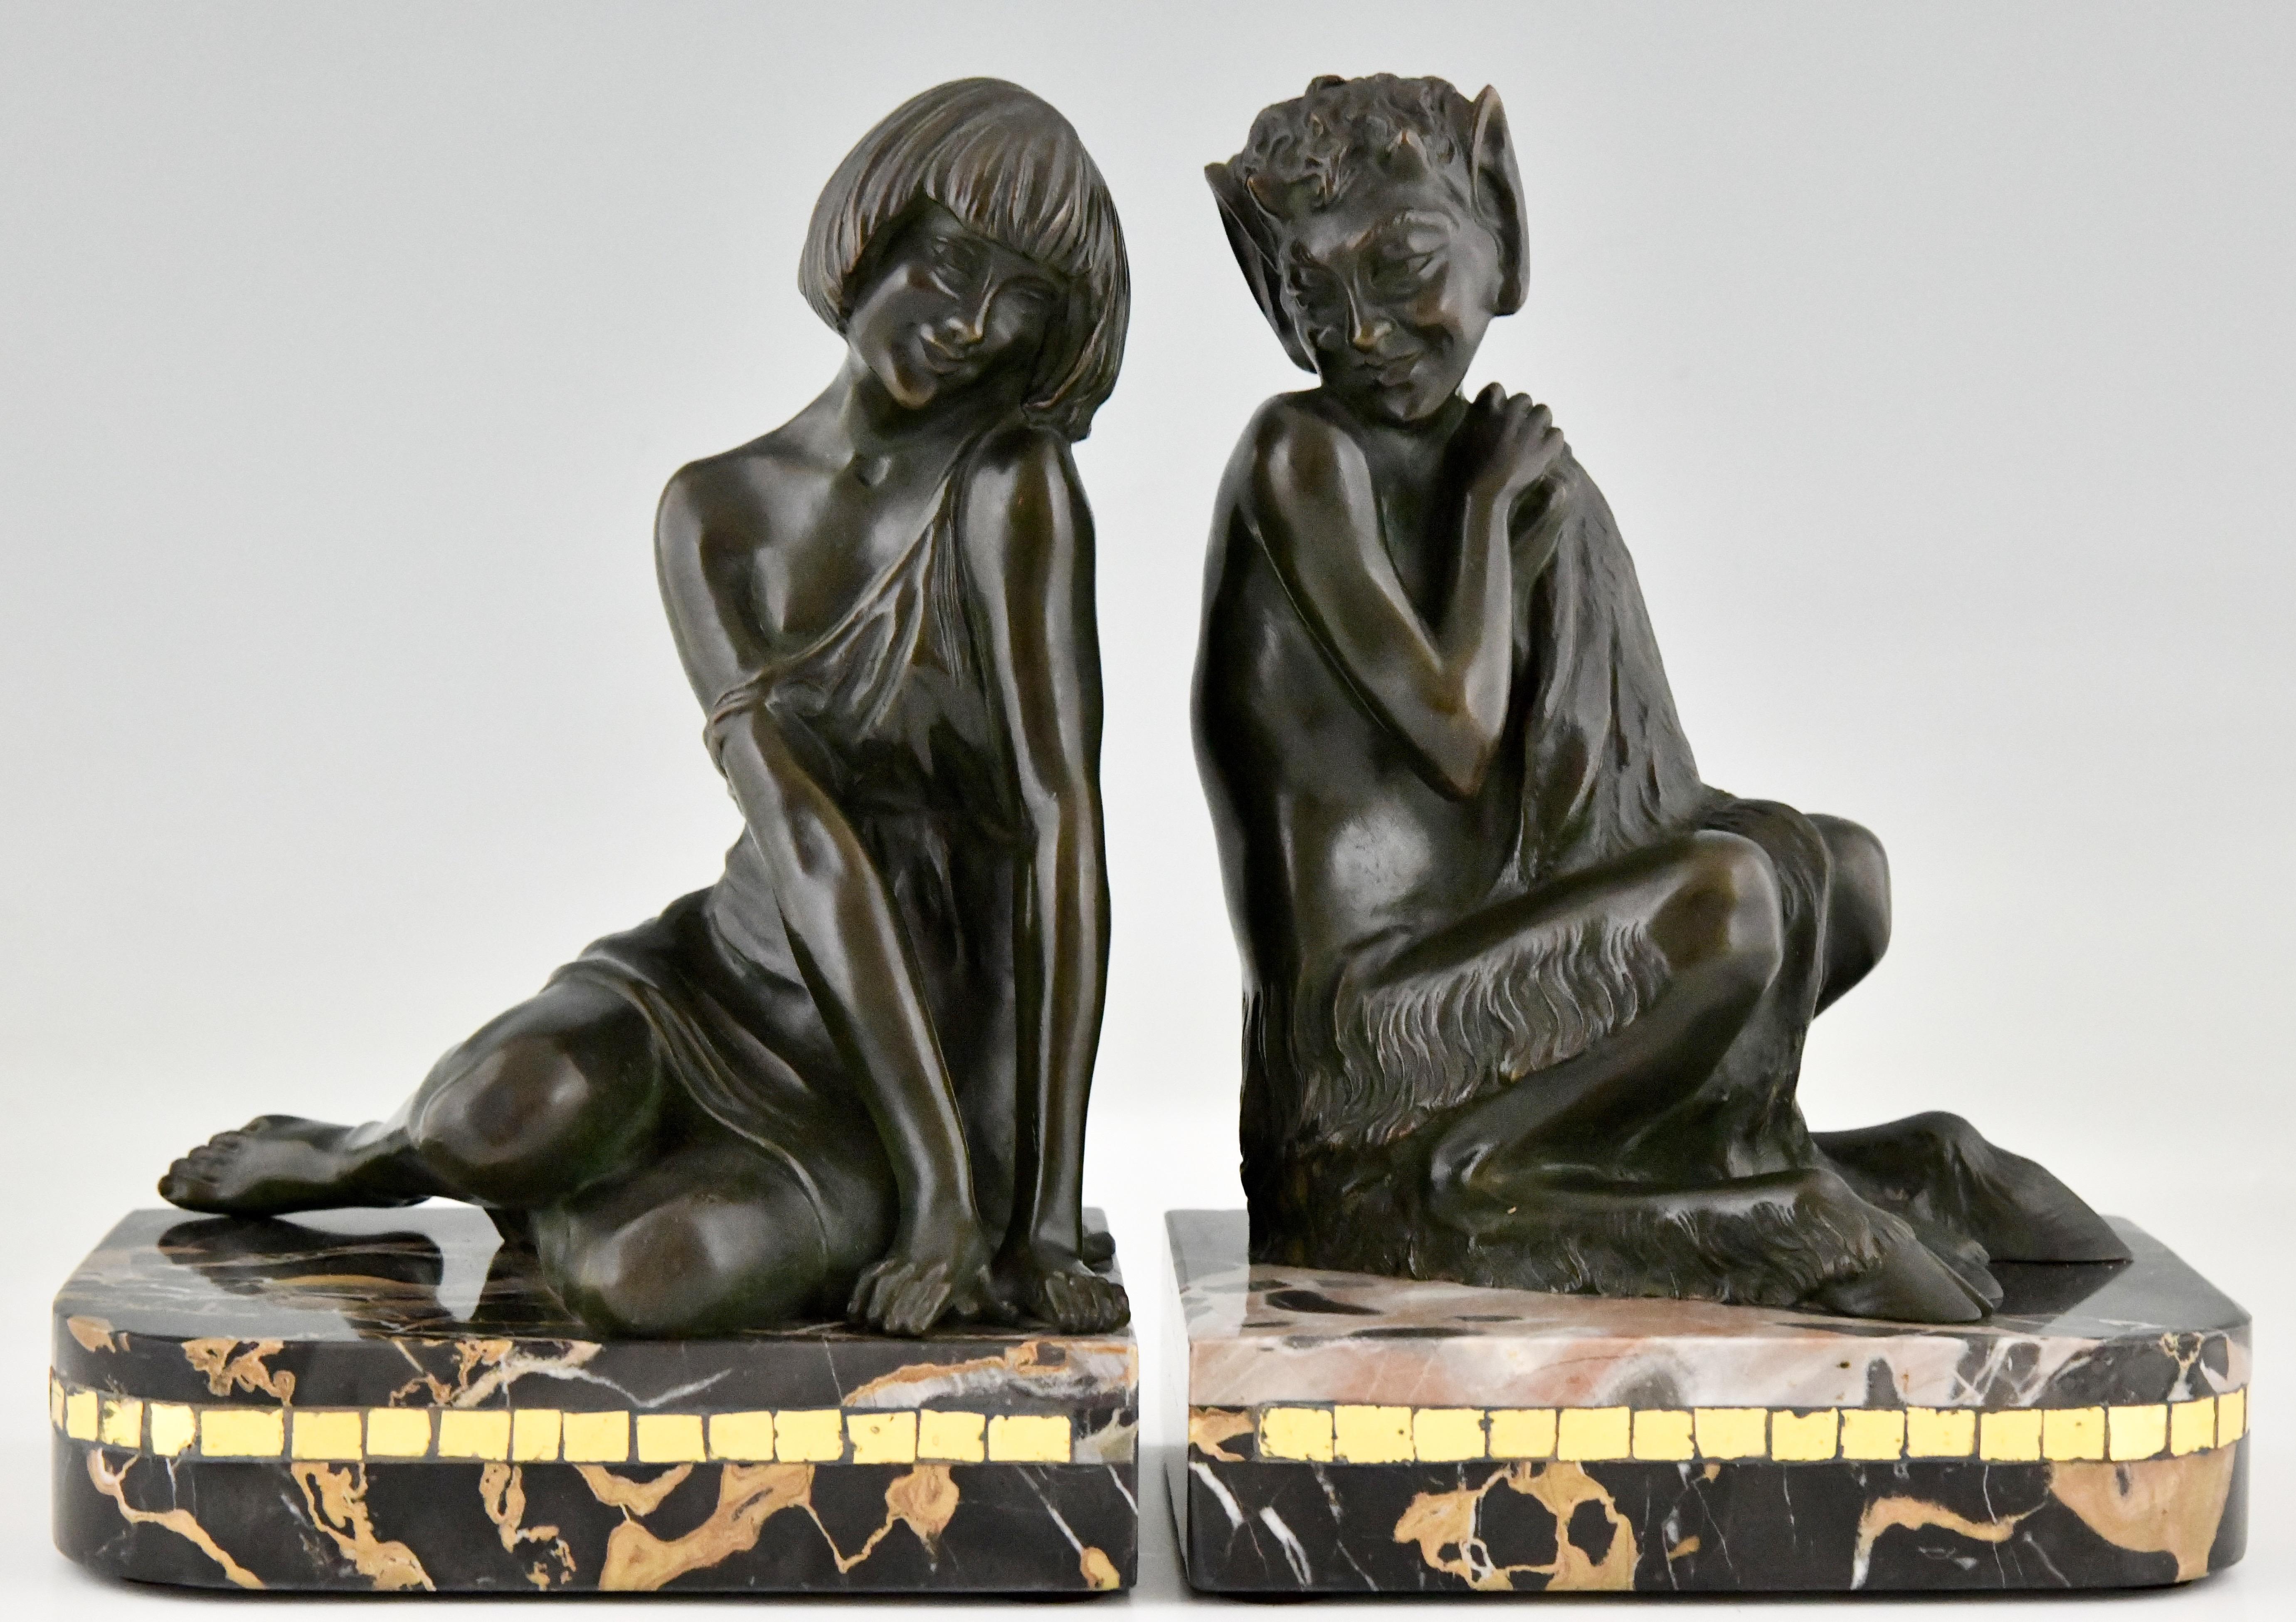 Art Deco bronze bookends nymph and faun by Pierre Le Faguays. Patinated bronze on a Portor marble base with glass inlay. France 1925. These bookends are illustrated on page 328 of Art Deco and other figures by Brian Catley, Antique collectors club.